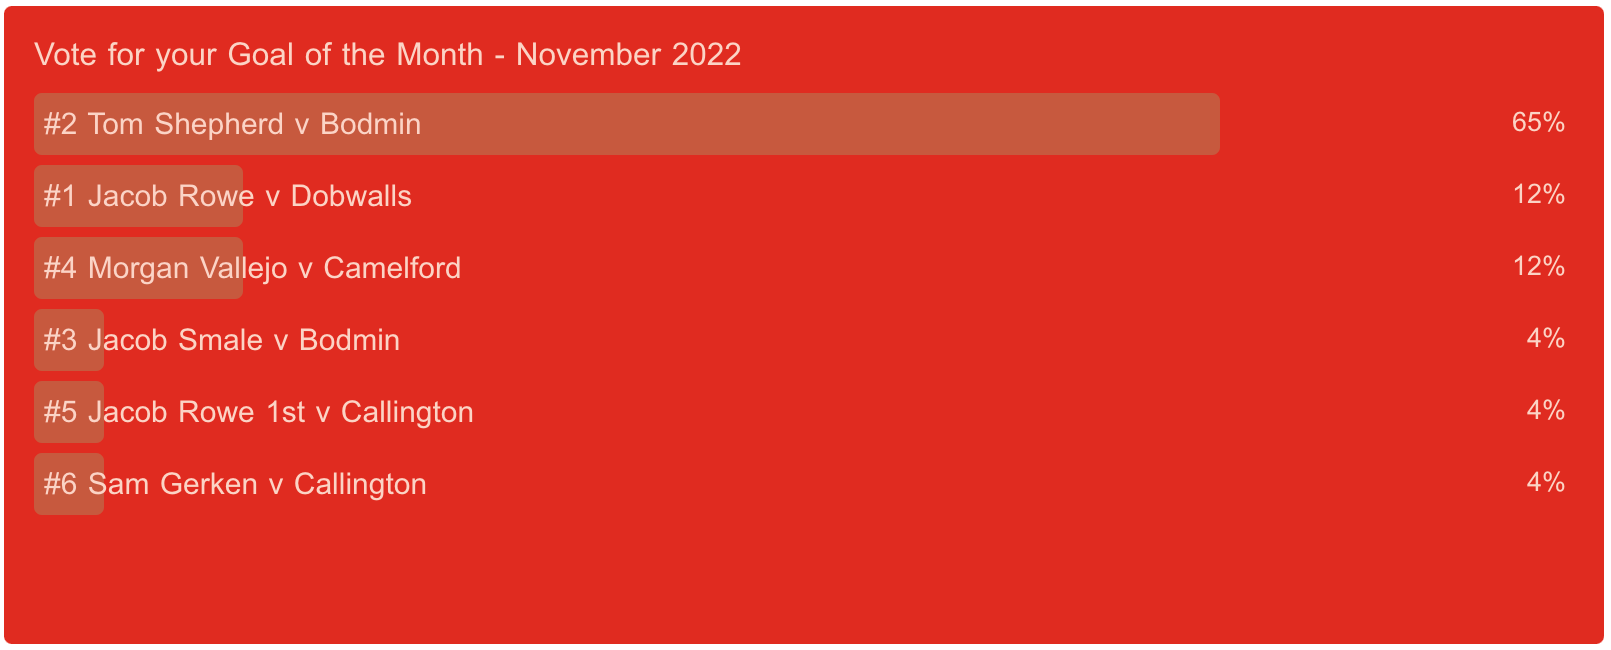 Goal of the Month Results - November 2022